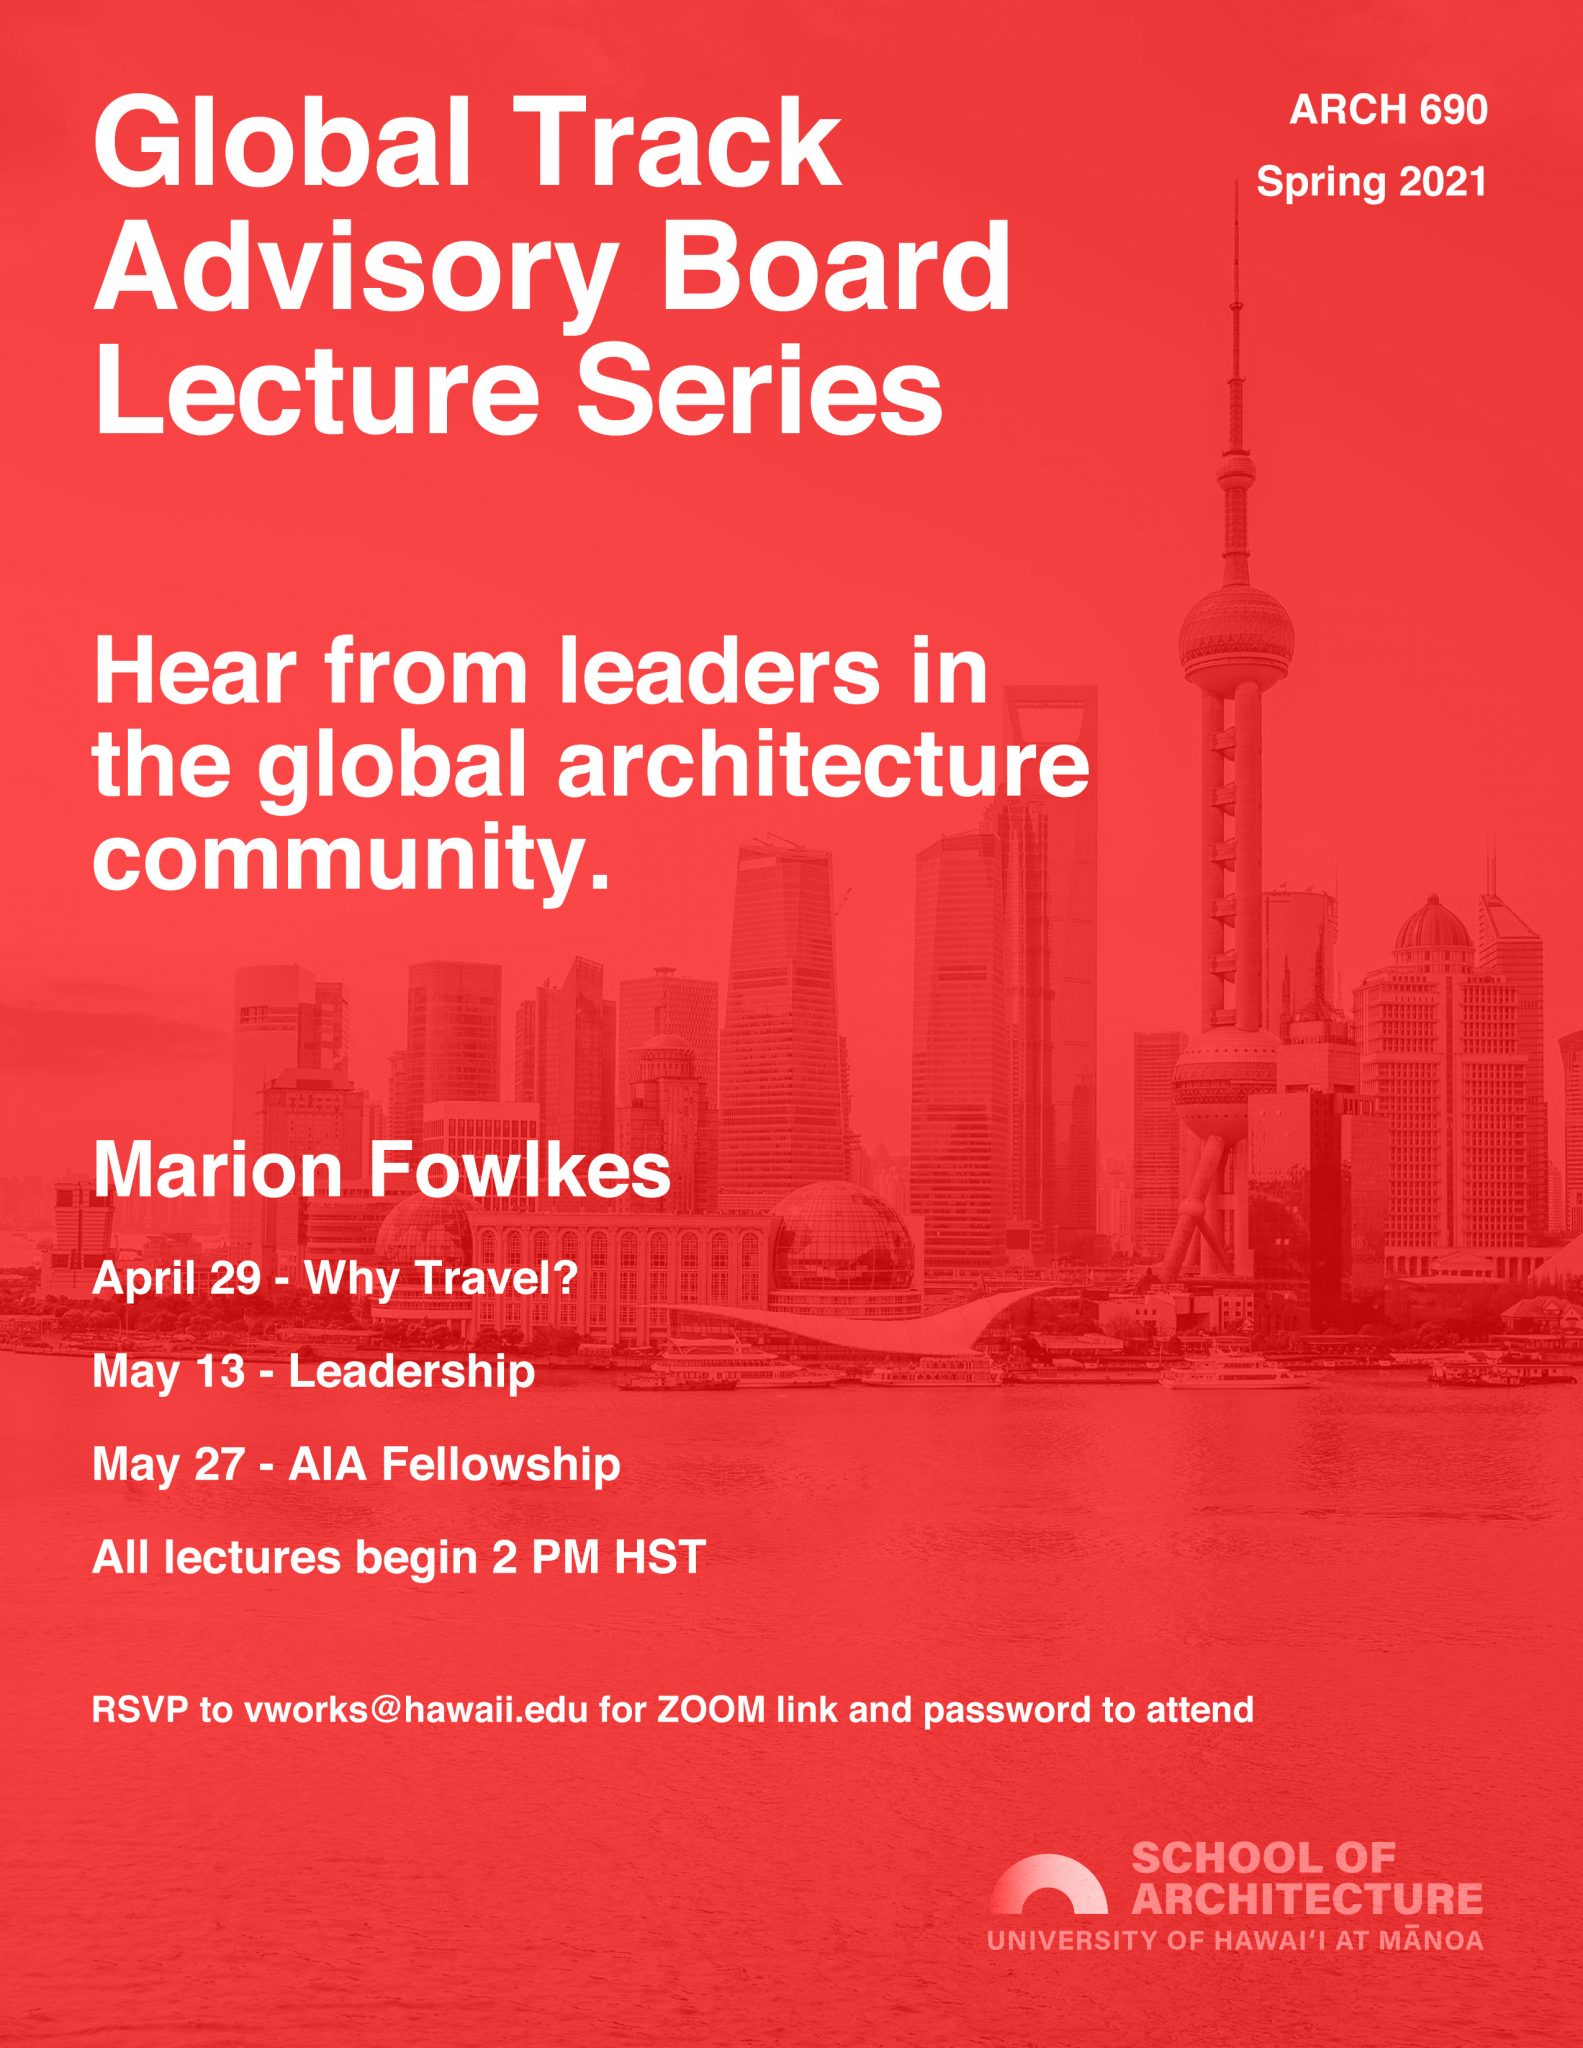 Global Track Advisory Board Lecture Series: Marion Fowlkes